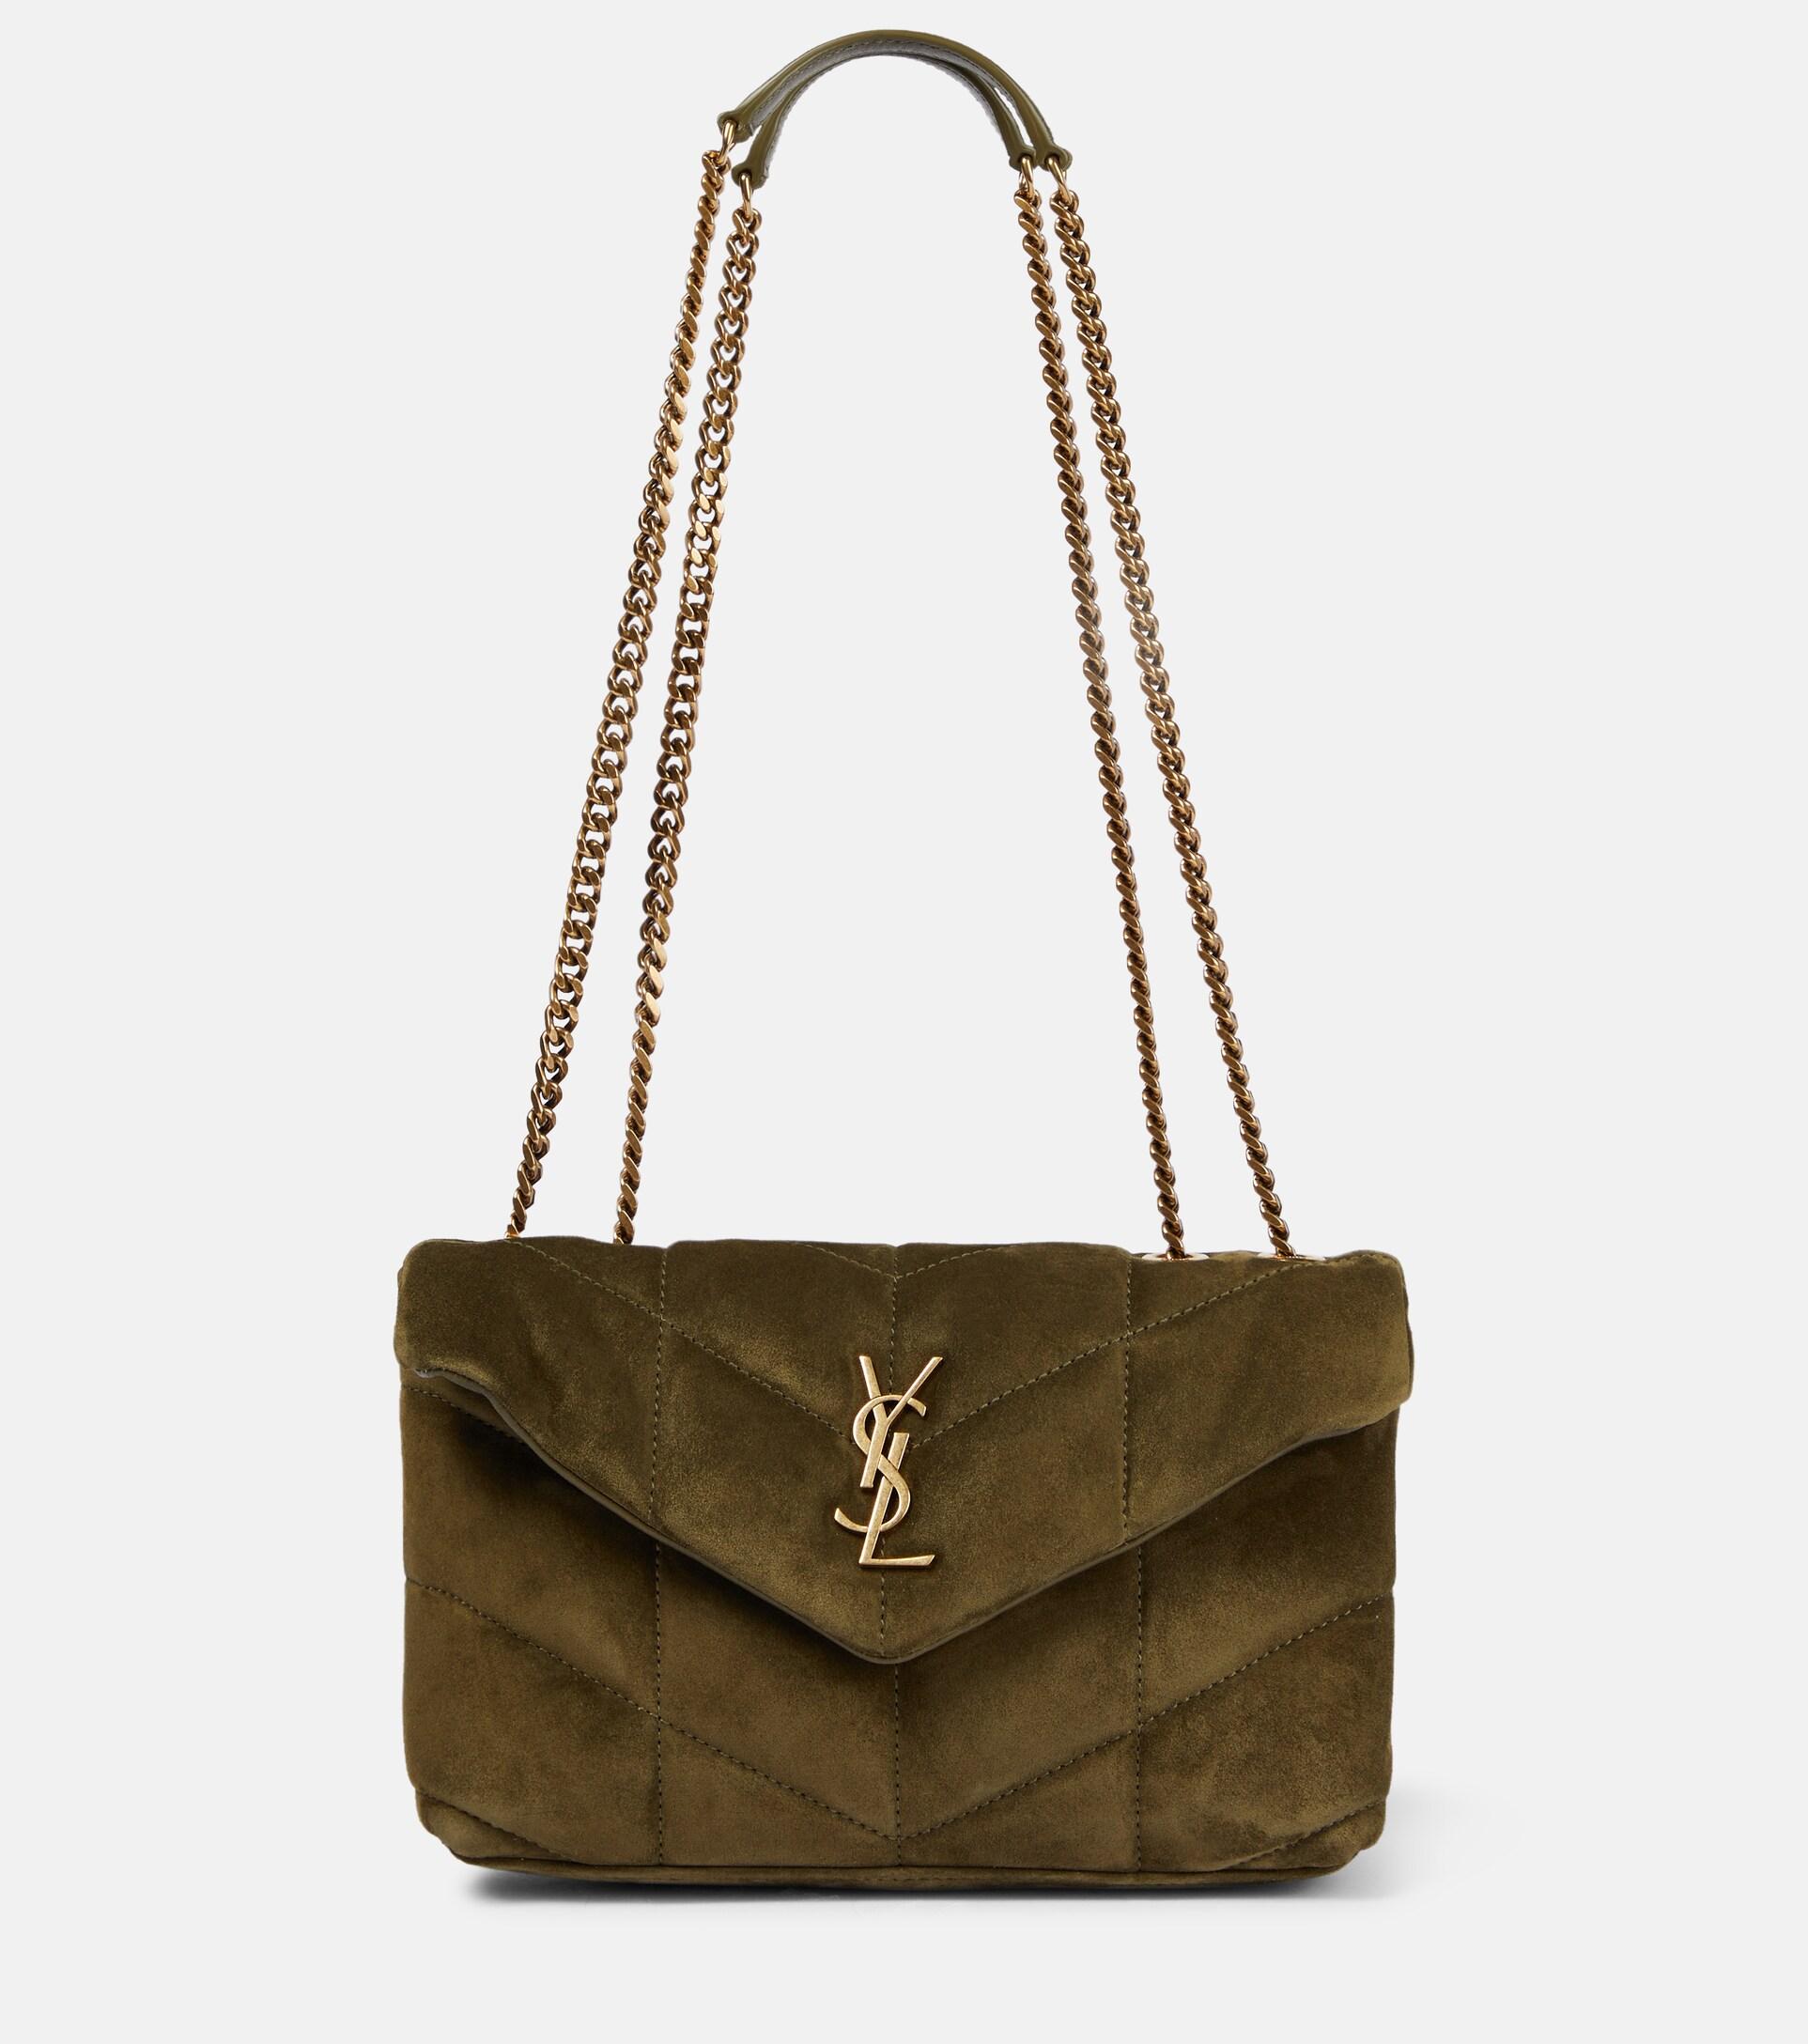 Saint Laurent Toy Loulou Puffer Shoulder Bag - Green - One Size